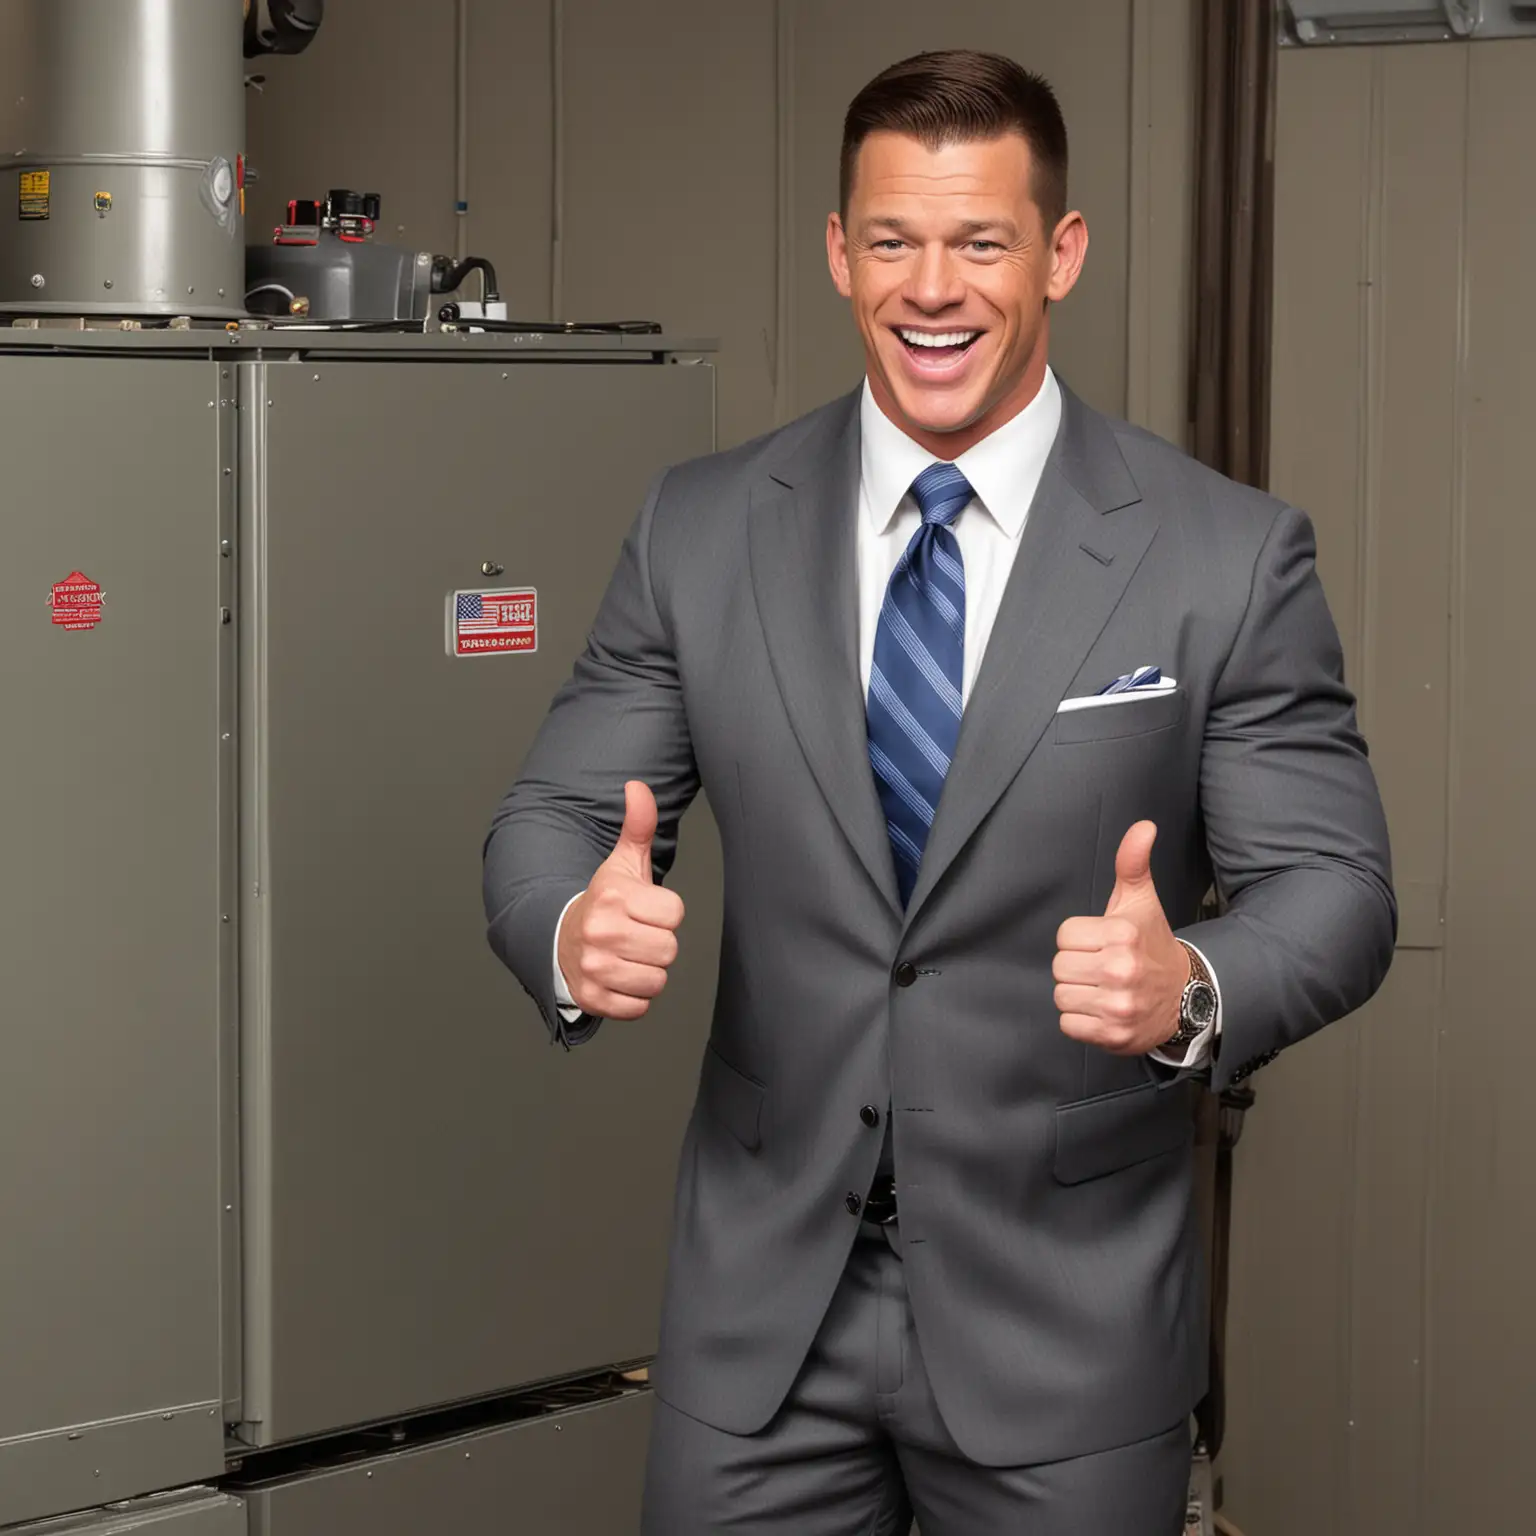 HVAC Expert John Cena Celebrates in Formal Suit with Thumbs Up